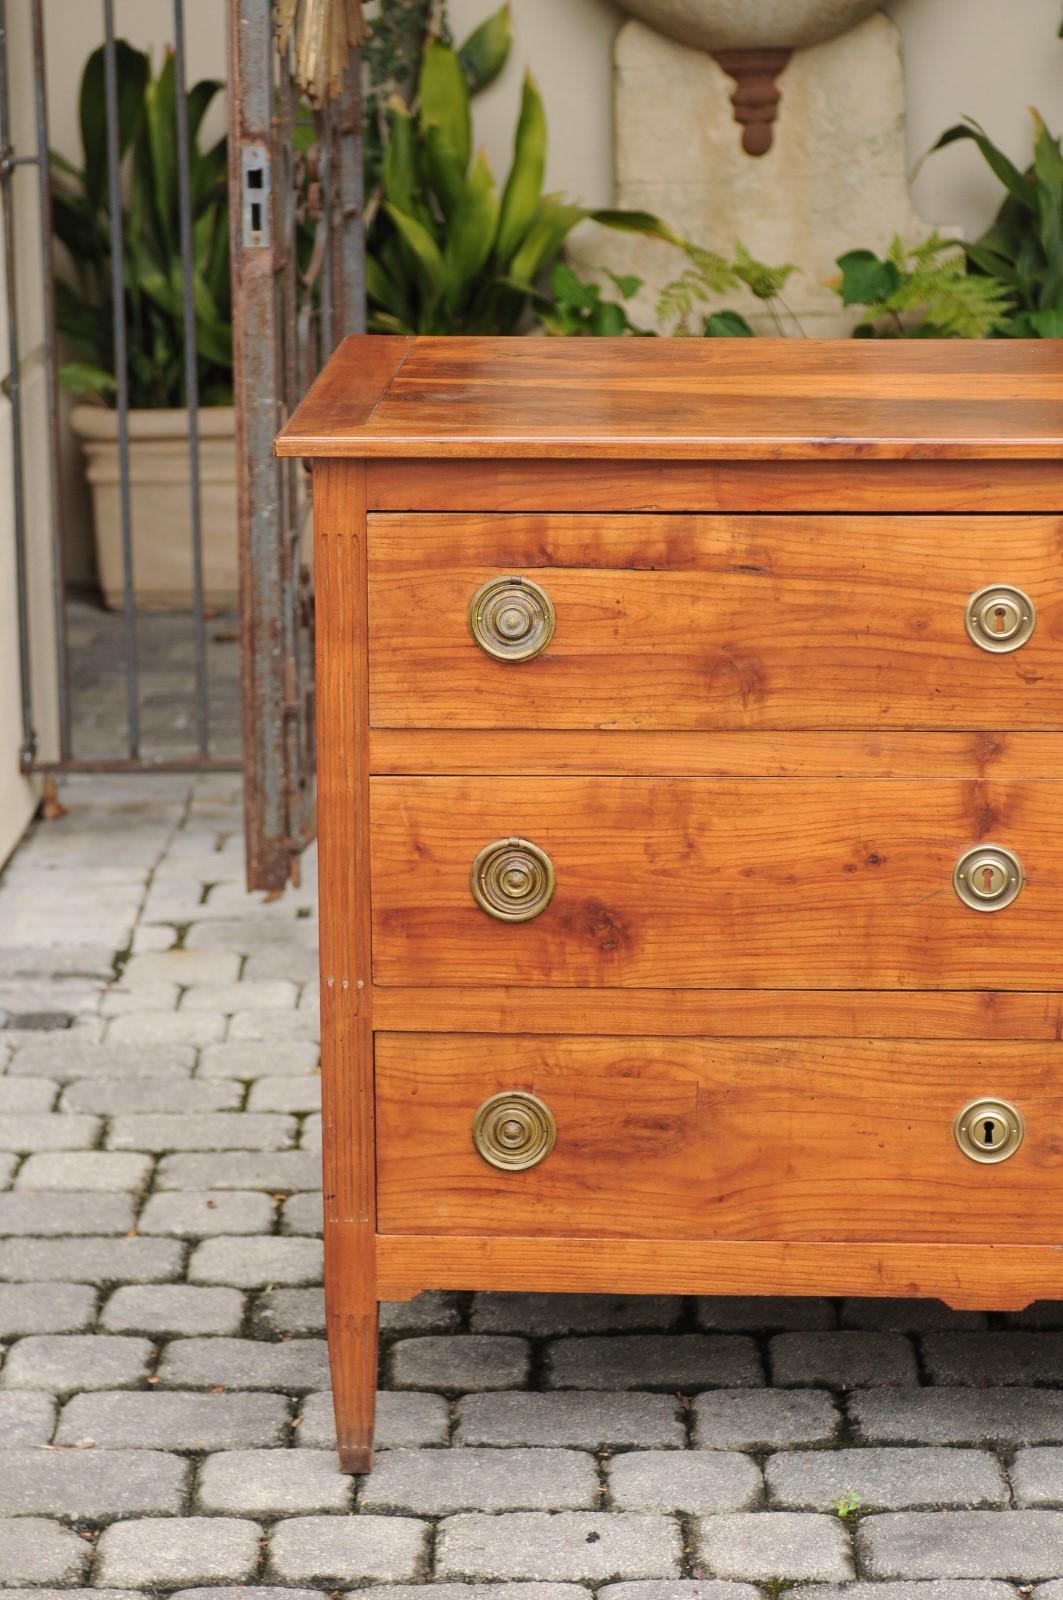 A French Louis XVI style walnut three-drawer commode from the mid-19th century, with butterfly veneer, fluted side posts and tapered feet. Born under the reign of France's last king Louis-Philippe, this walnut commode features a rectangular planked